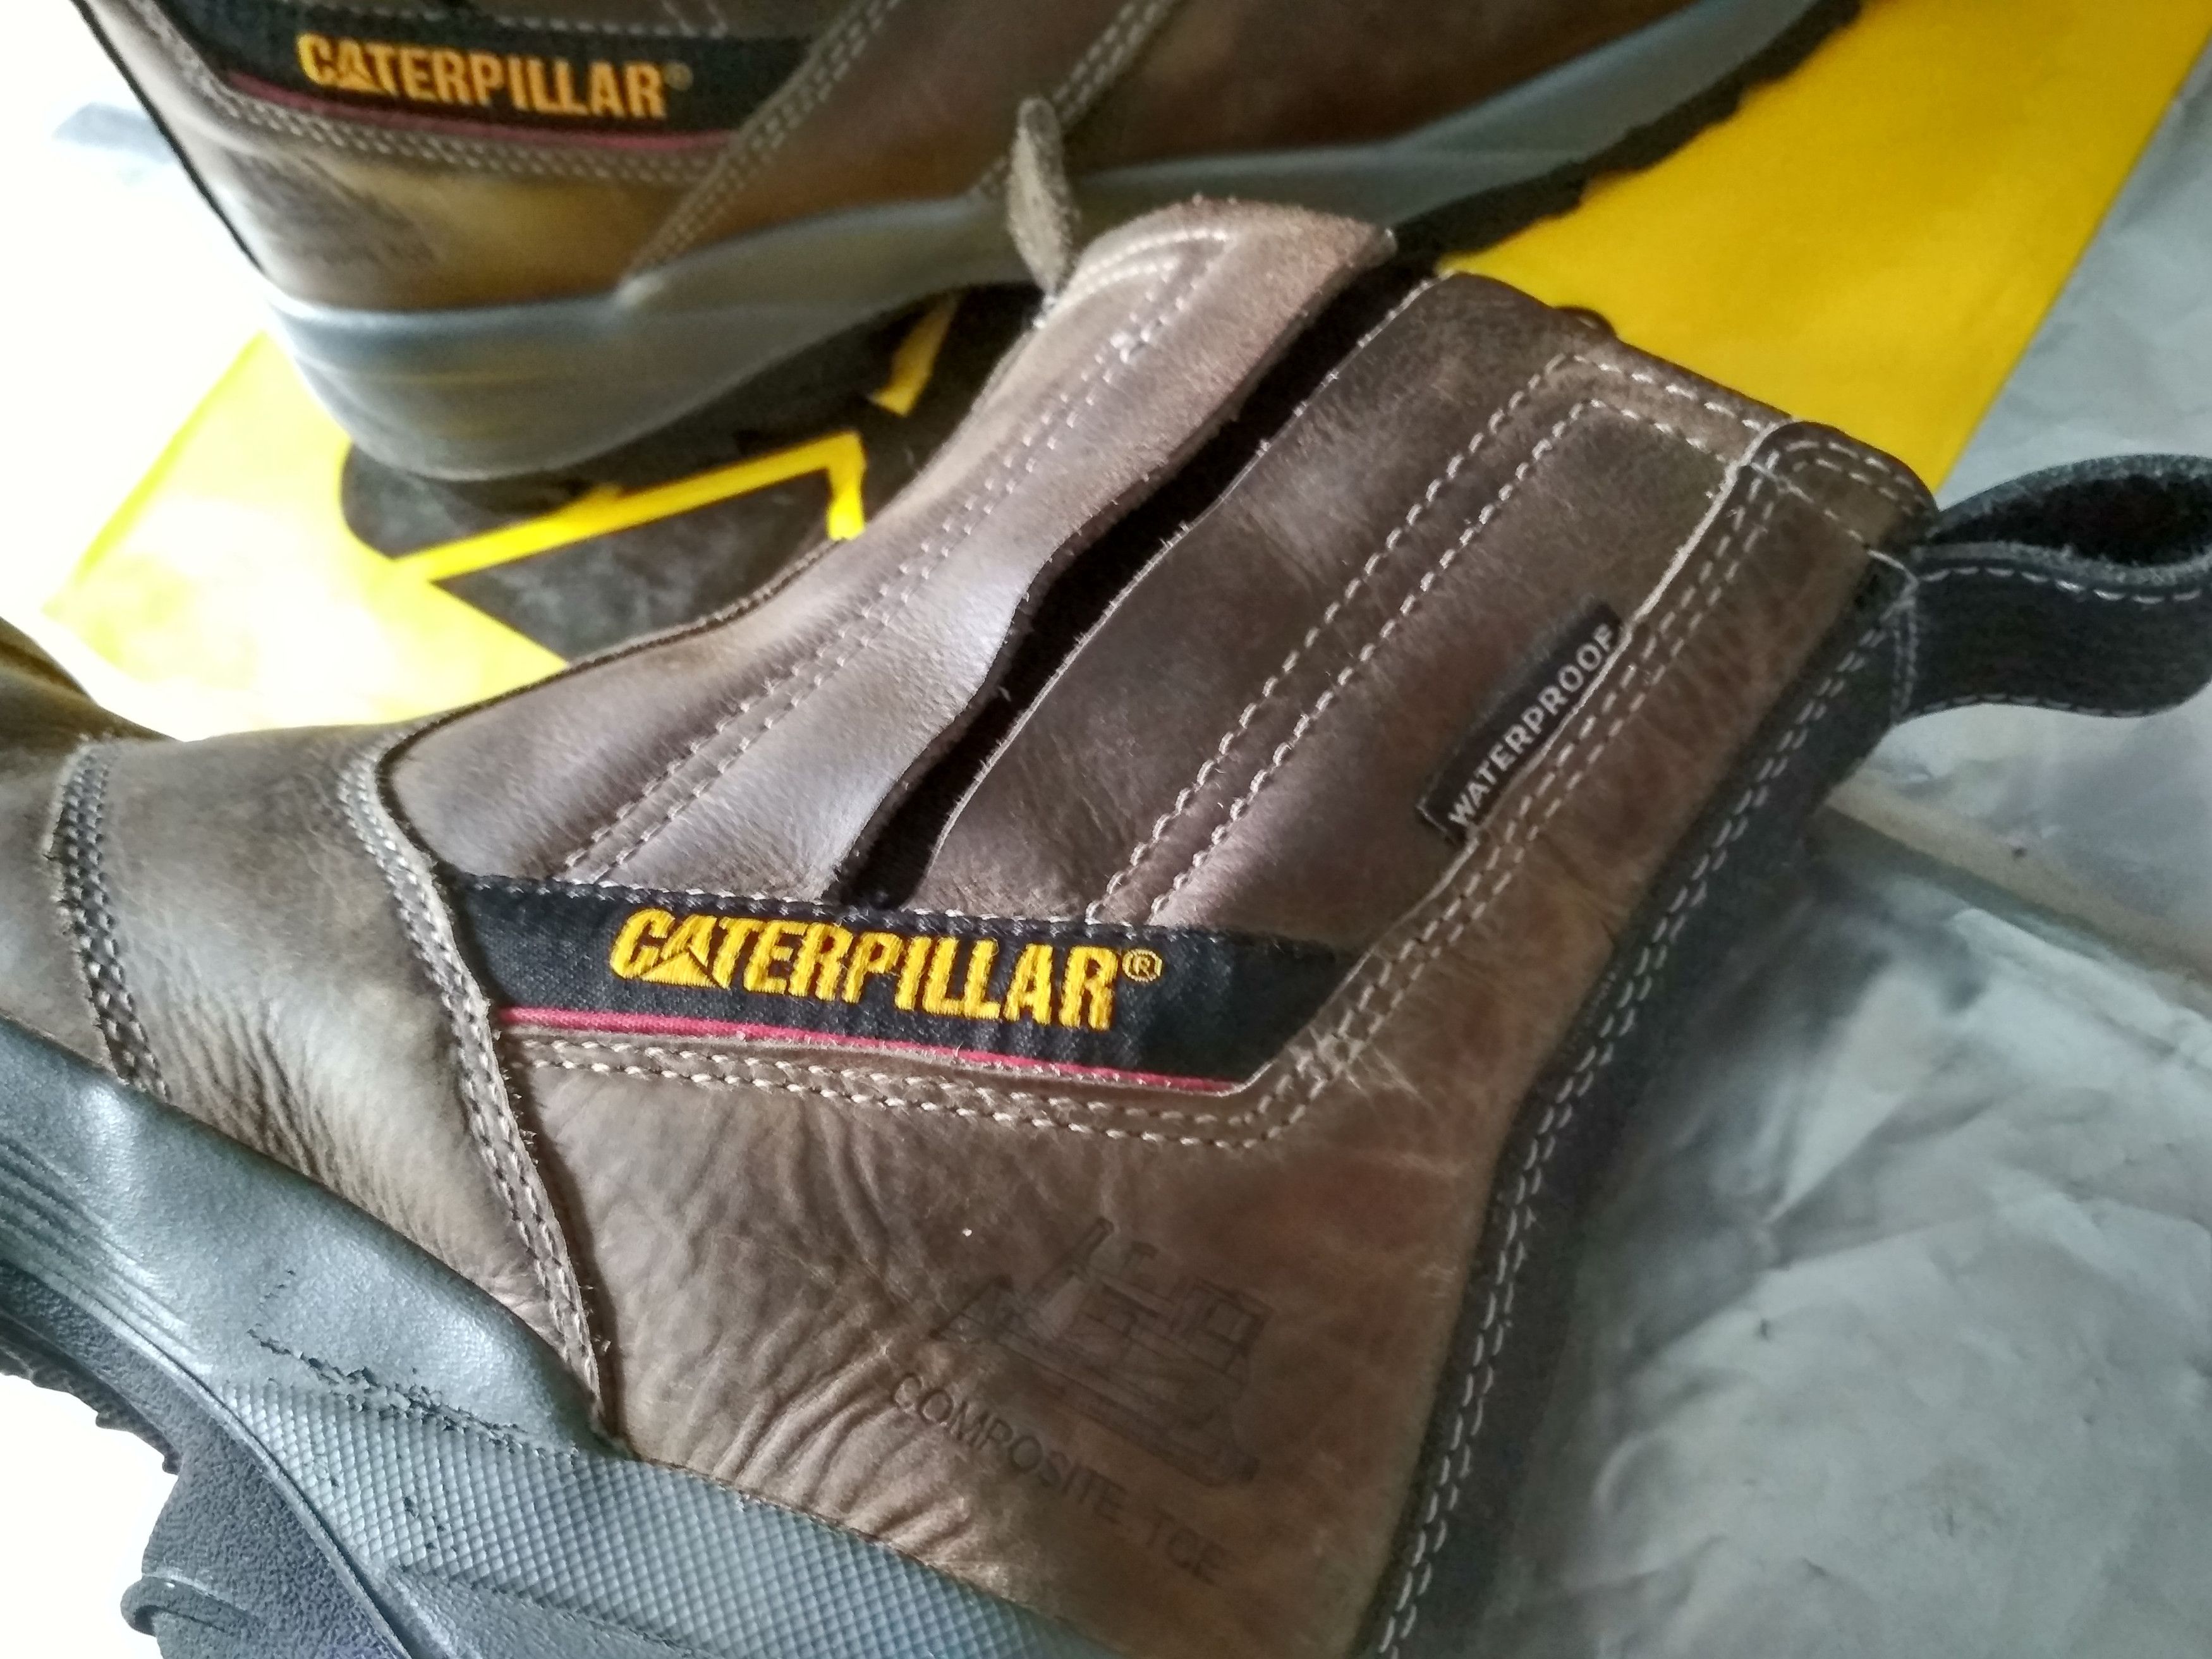 Caterpillar Cat Pull on waterproof Boots for Men's Size US 8 / EU 41 - 7 Preview